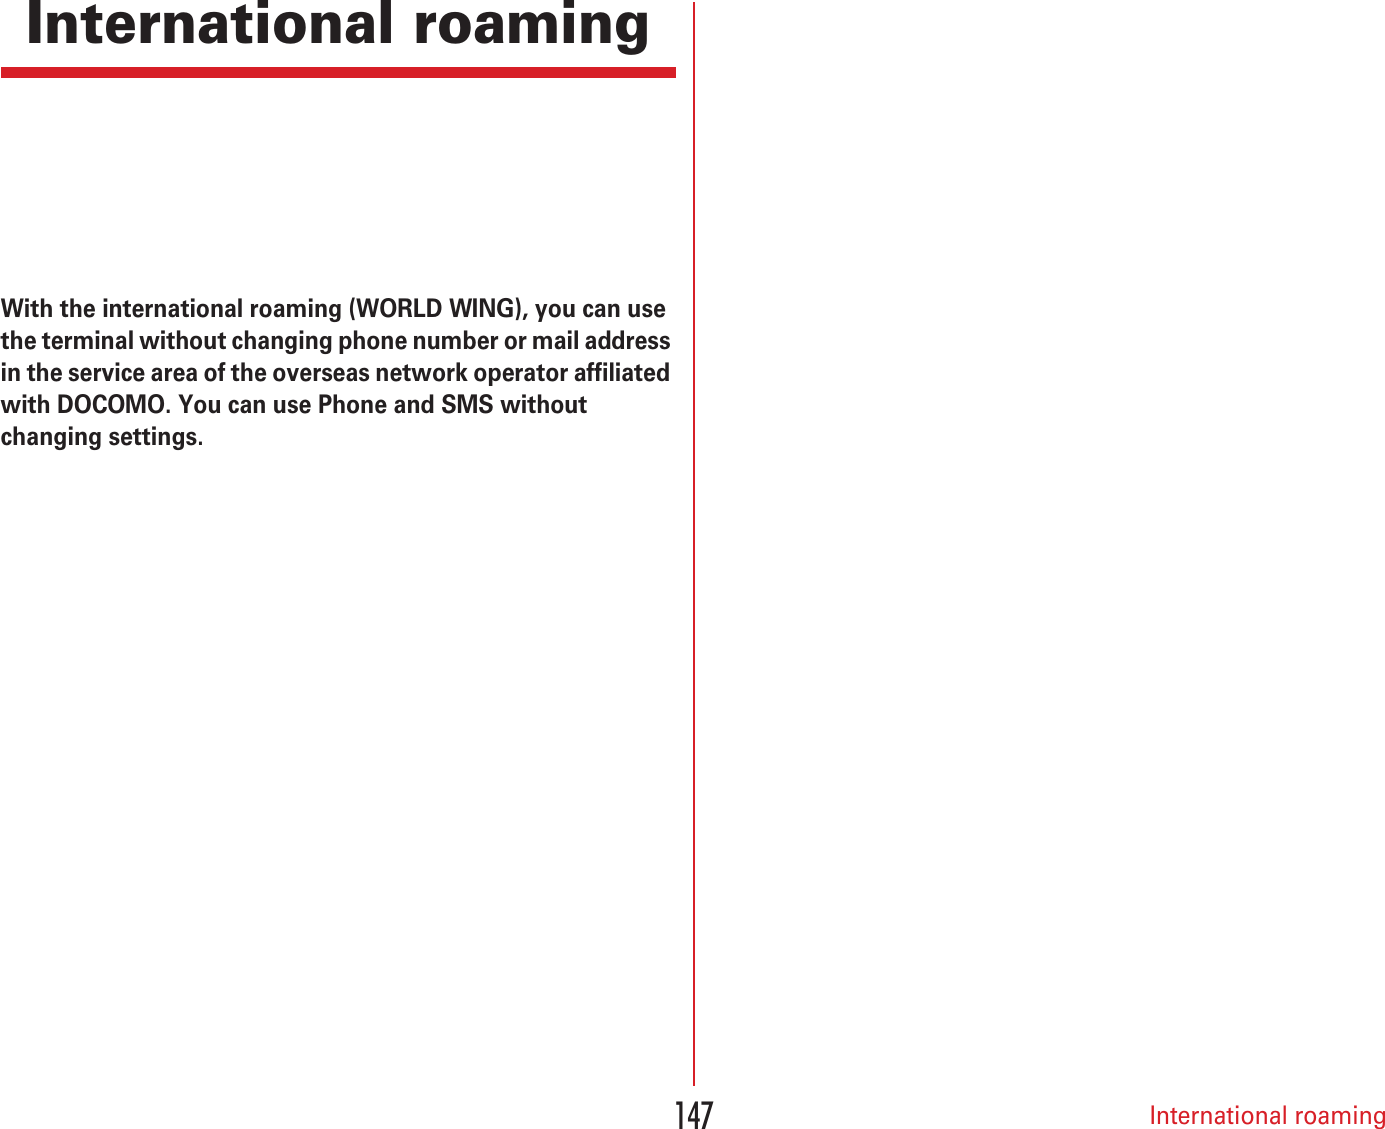 International roaming147International roamingWith the international roaming (WORLD WING), you can use the terminal without changing phone number or mail address in the service area of the overseas network operator affiliated with DOCOMO. You can use Phone and SMS without changing settings.